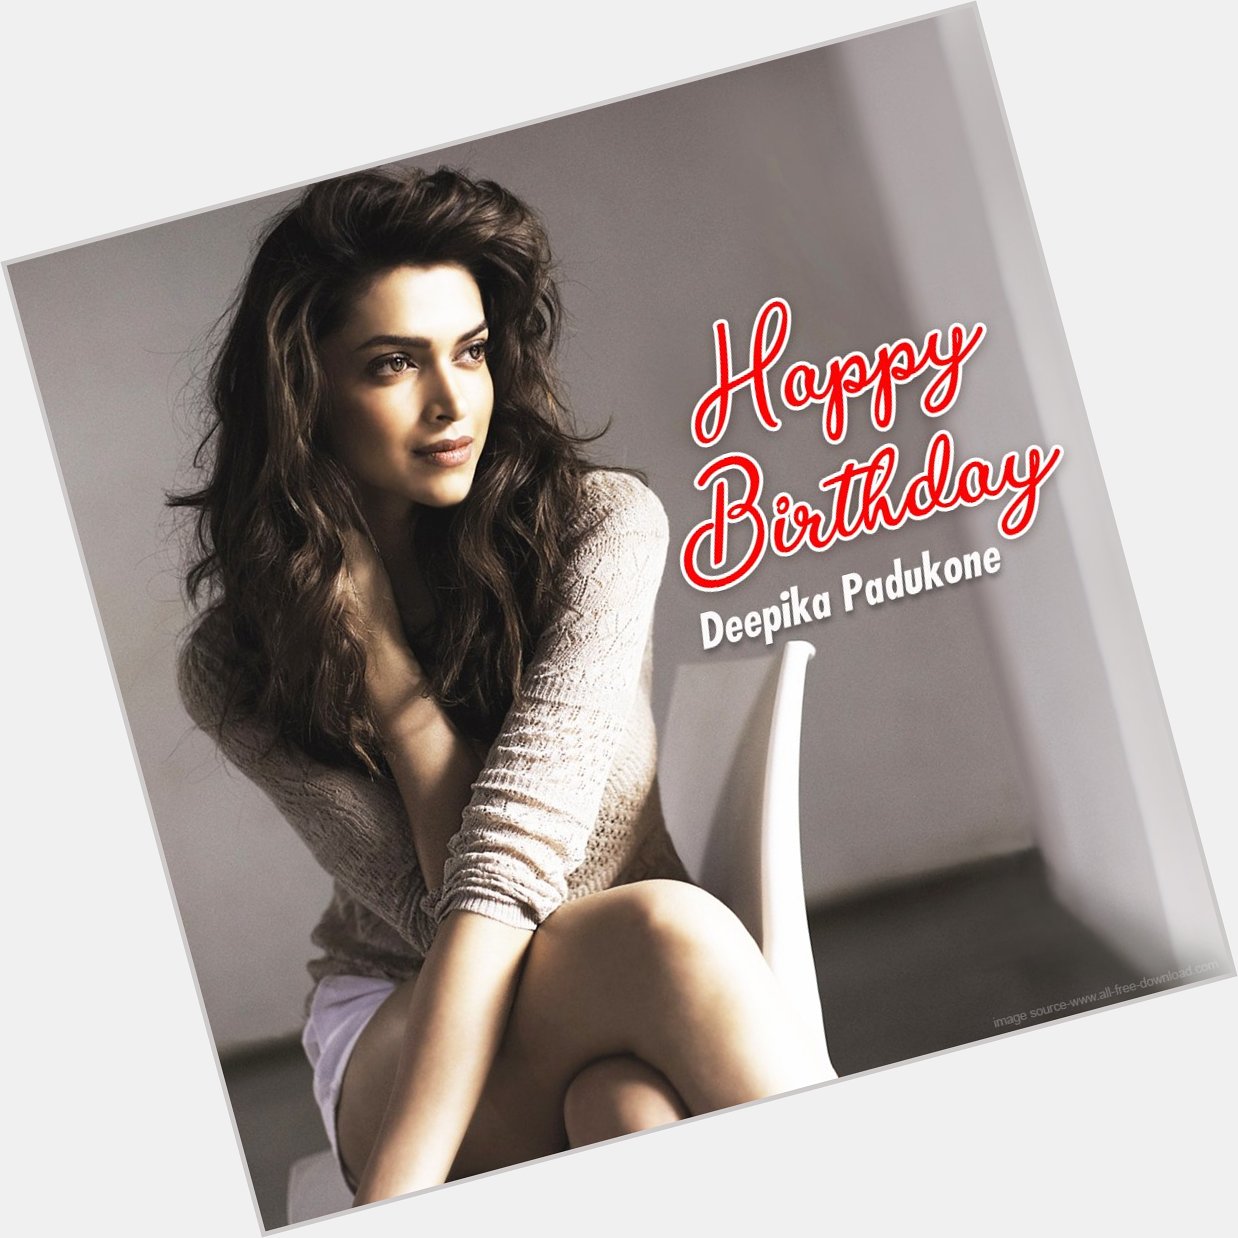 Wishing the dimple queen of bollywood, Deepika
Padukone a very happy birthday. 